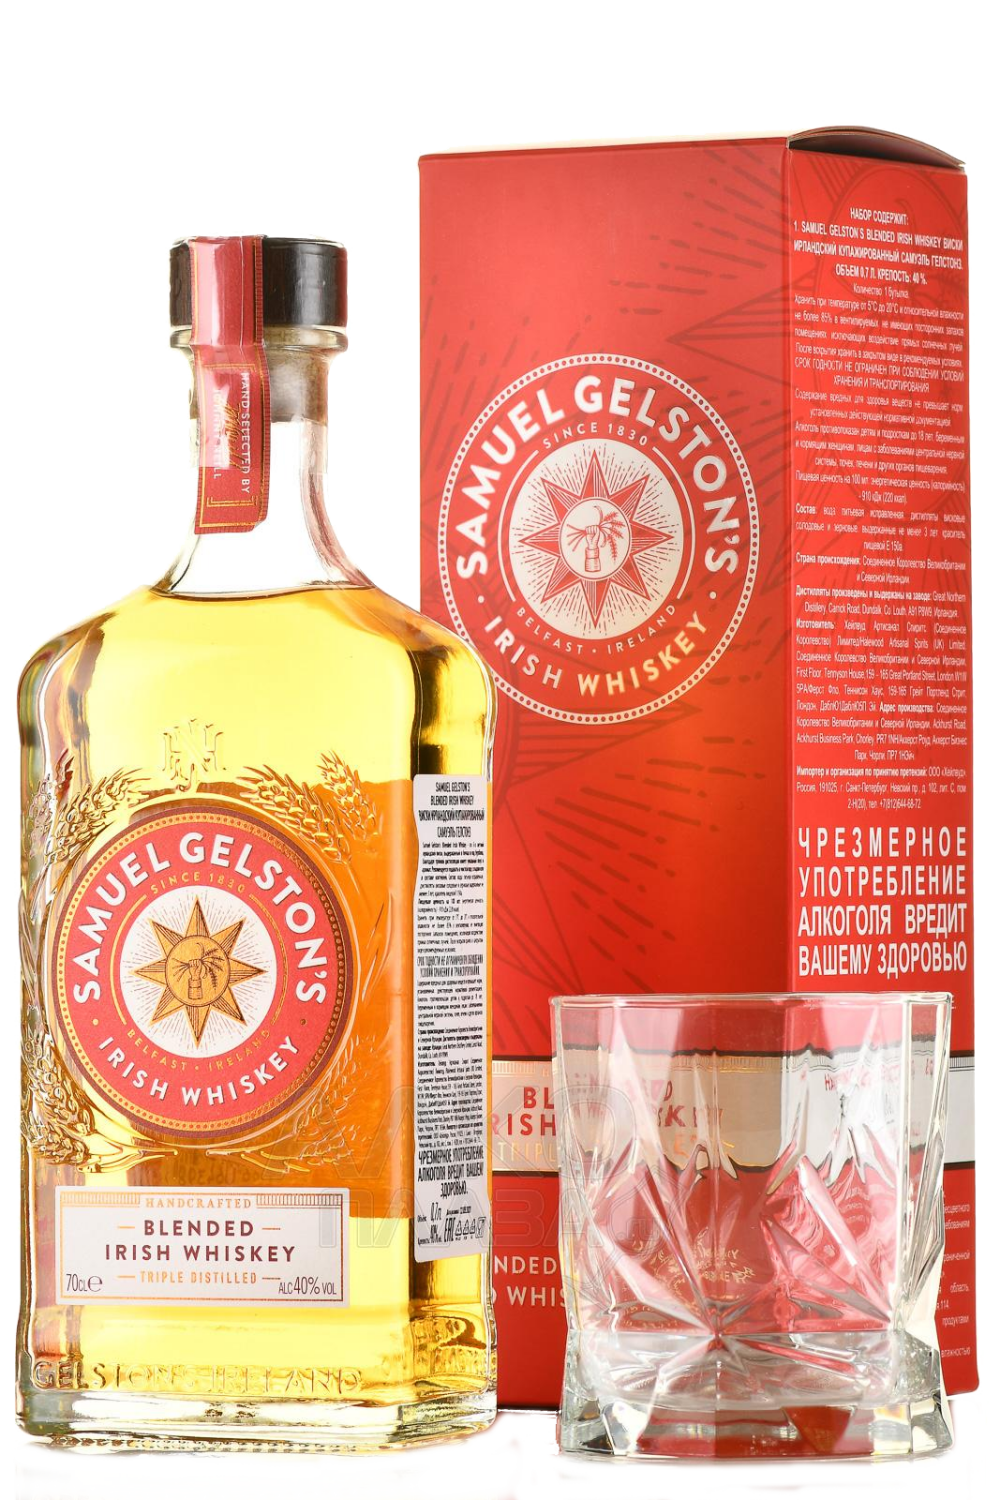 Gelston's Blended Irish Whisky (gift box with glass) hinch small batch blended irish whisky